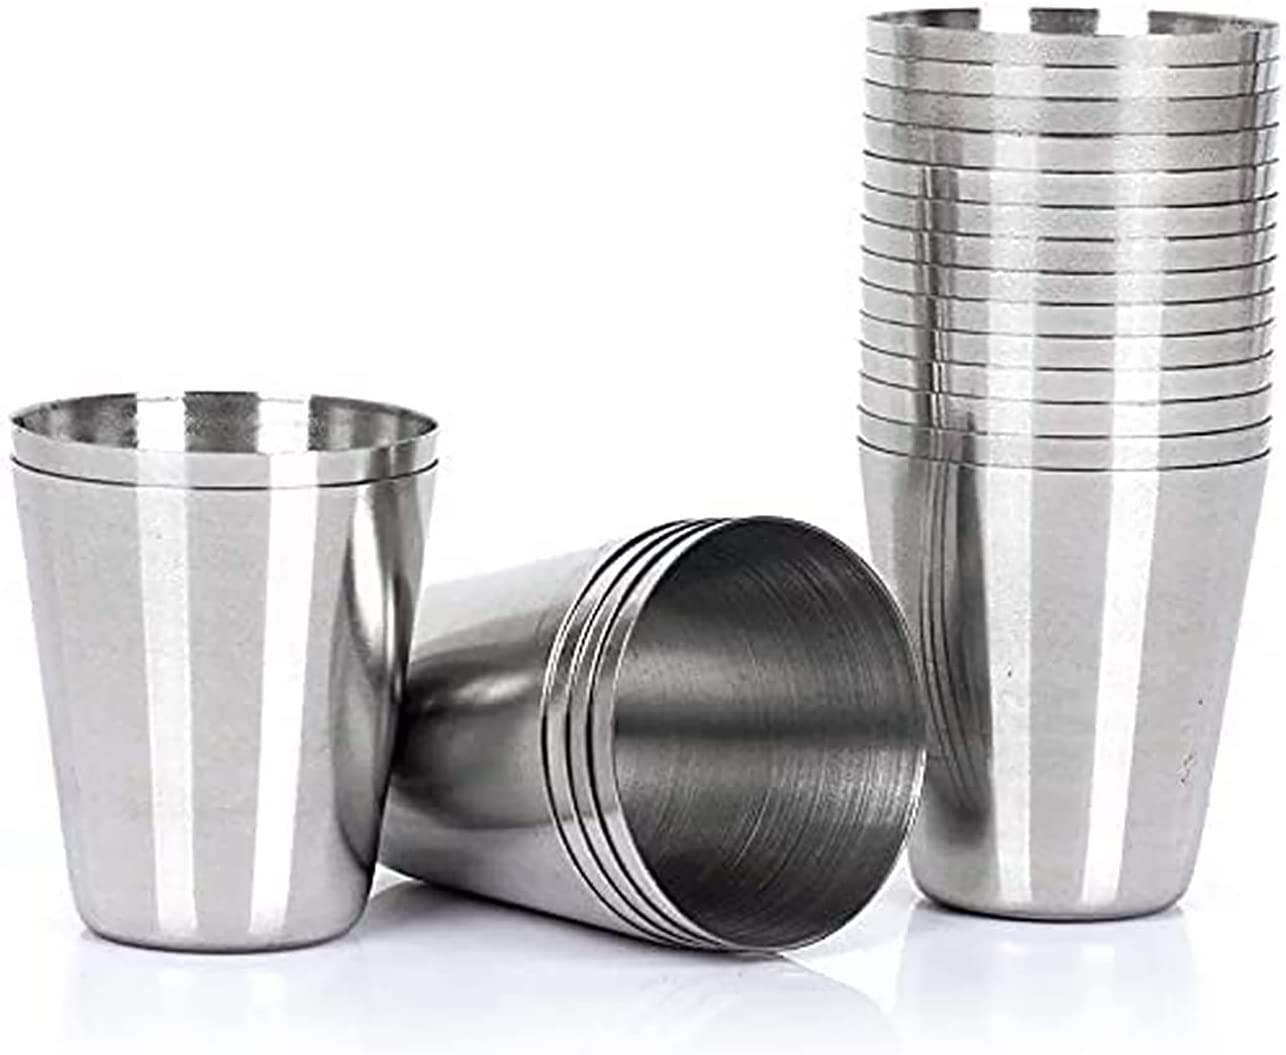 Set of 6pcs Stainless Steel Shot Glasses Drinking Vessel 30 ml (1oz) Stainless Steel Cups Shatterproof Pint Drinking Cups Metal Drinking Glasses for